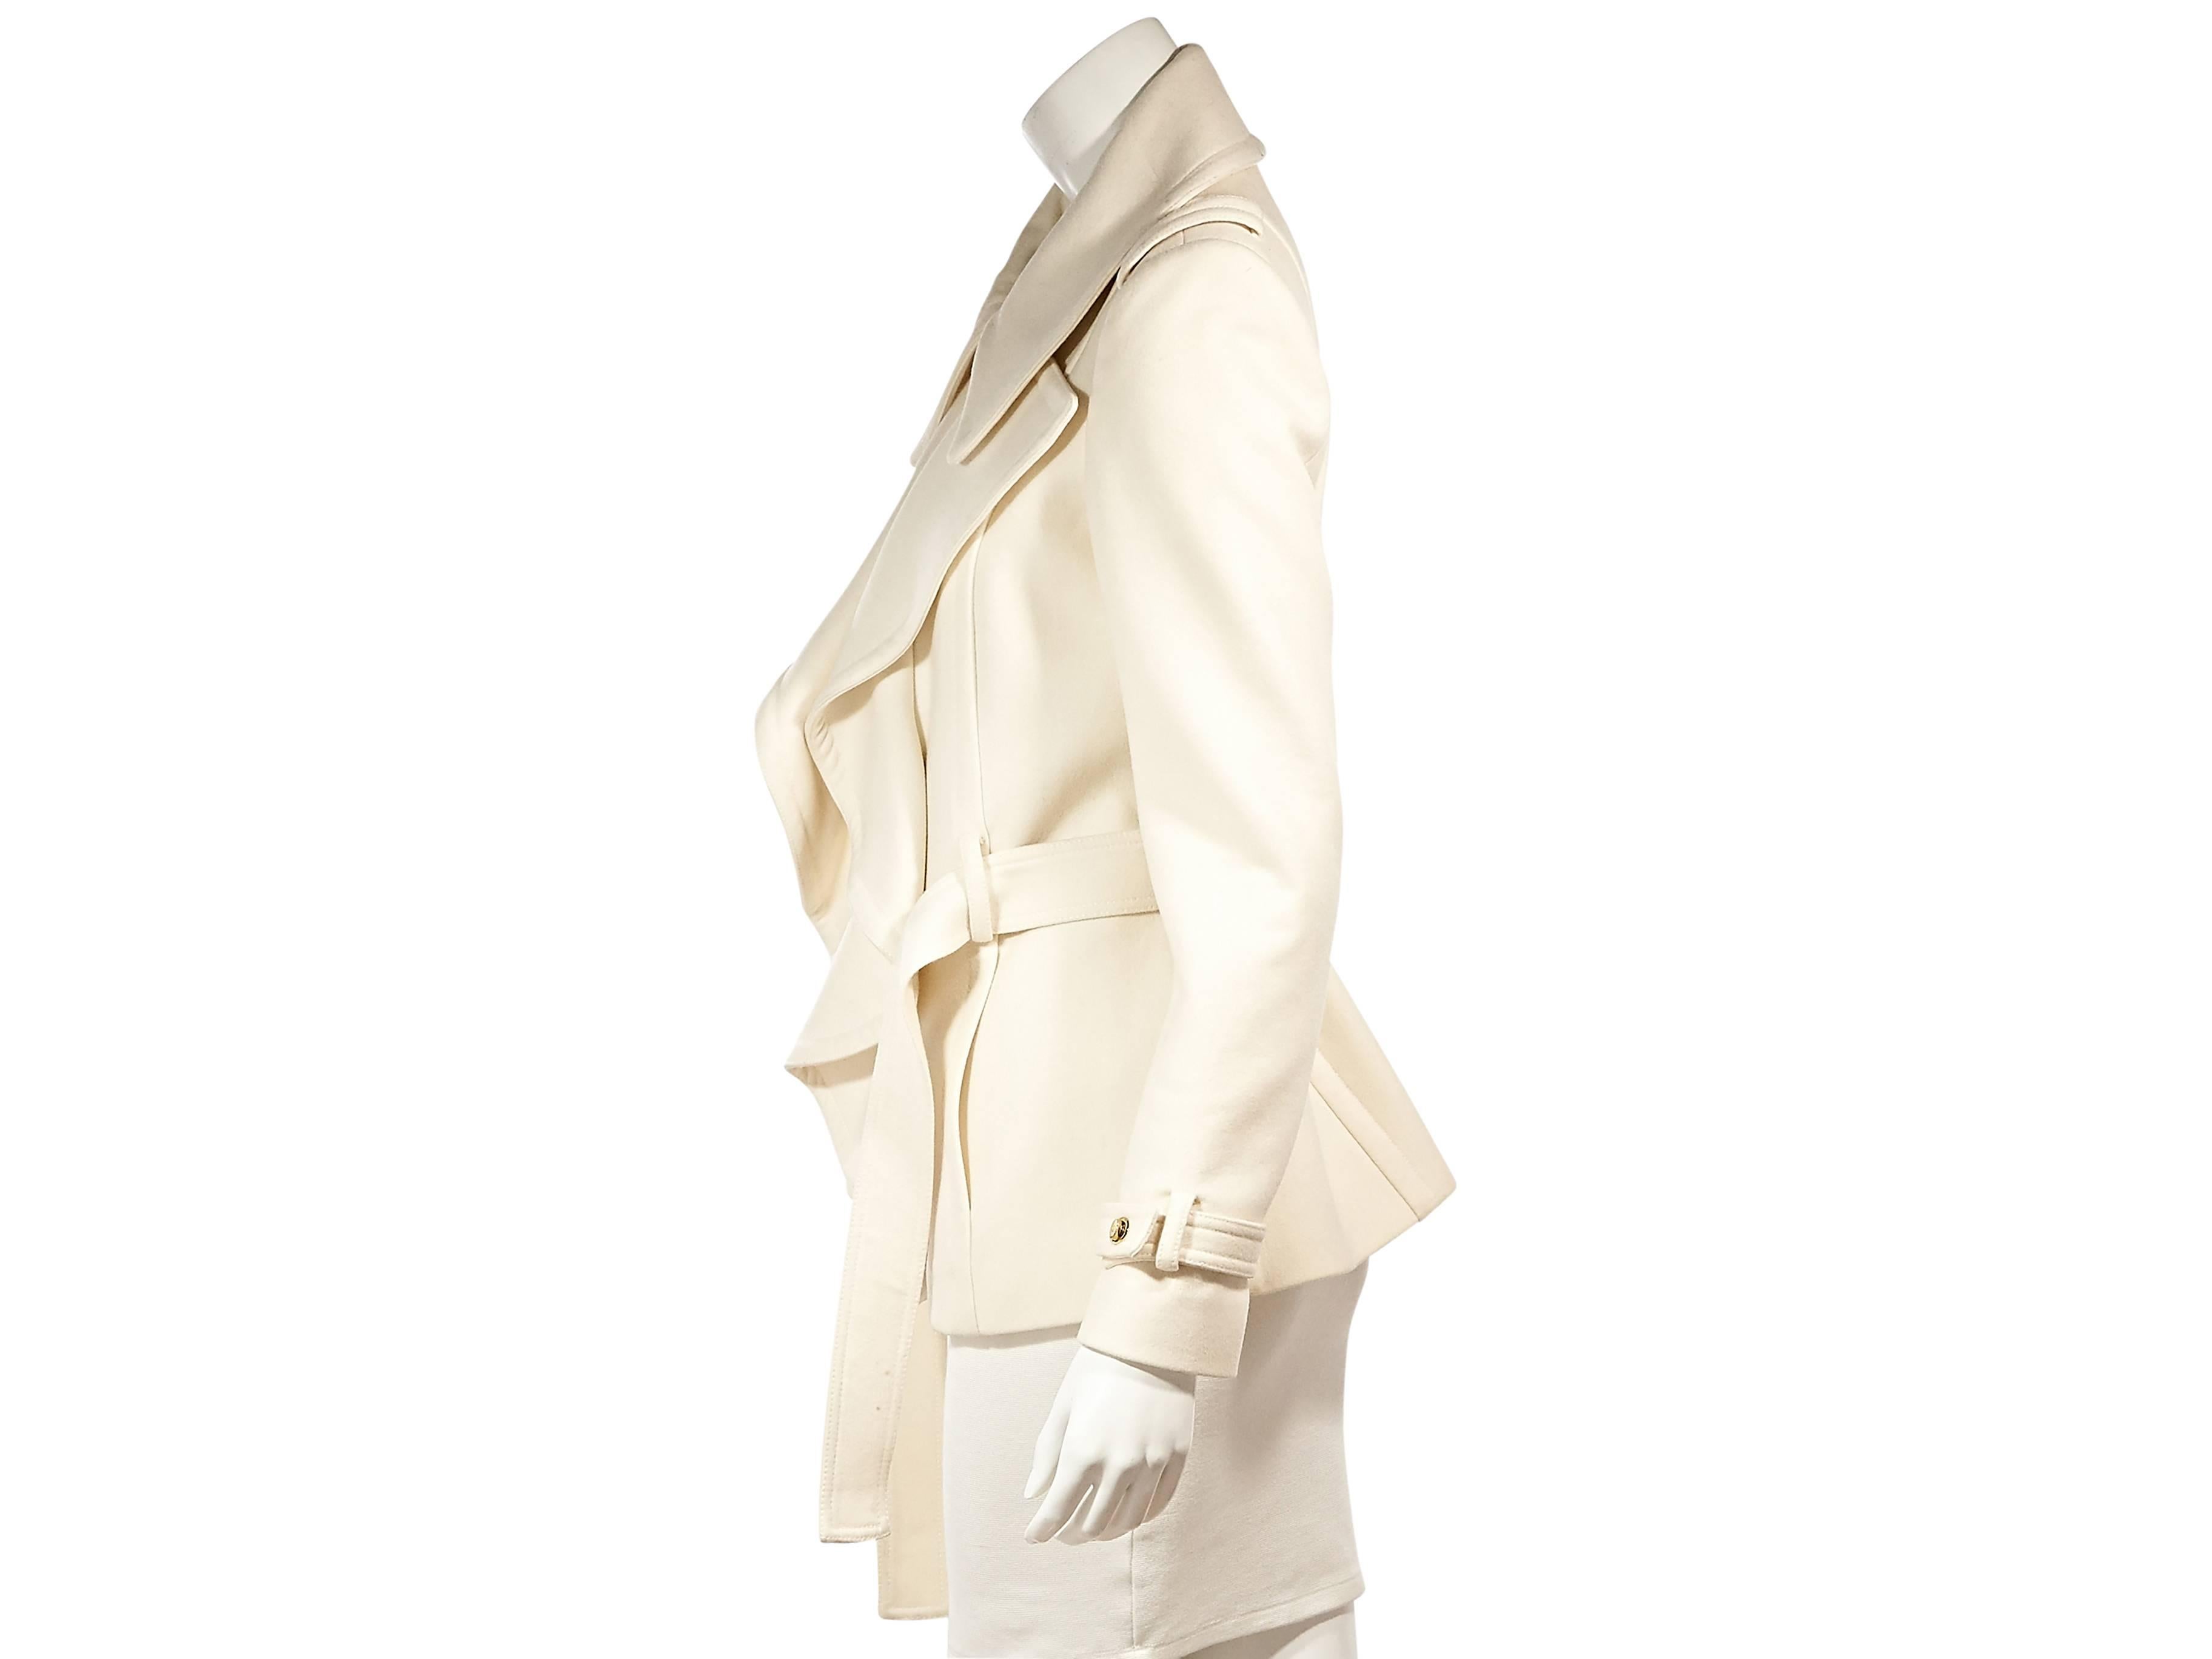 Product details:  ﻿Ivory wool and cashmere ruffle-front jacket by Roberto Cavalli.  Exaggerated spread collar and lapel.  Long sleeves.  Button-front closure.  Tie belted waist. 
Condition: Excellent. 
Retails: $995.00